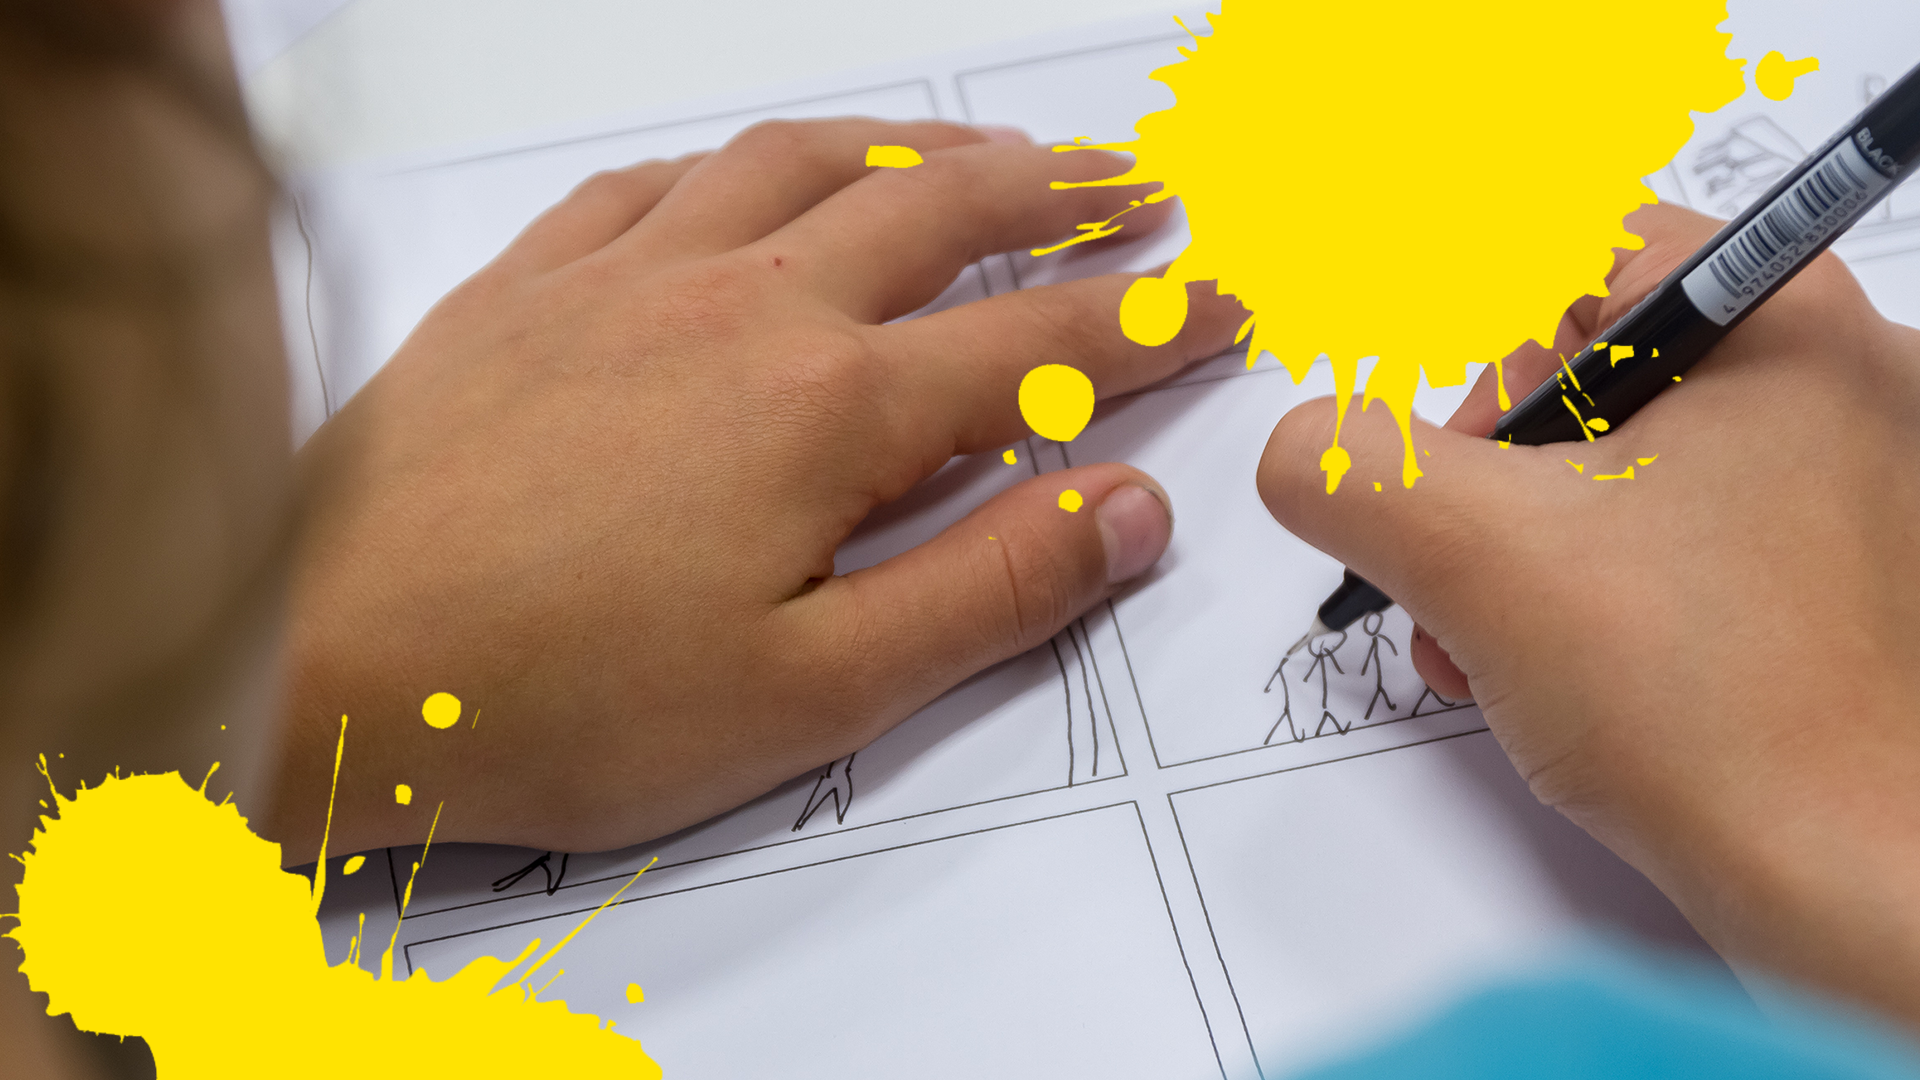 Hands drawing comic panel with yellow splats